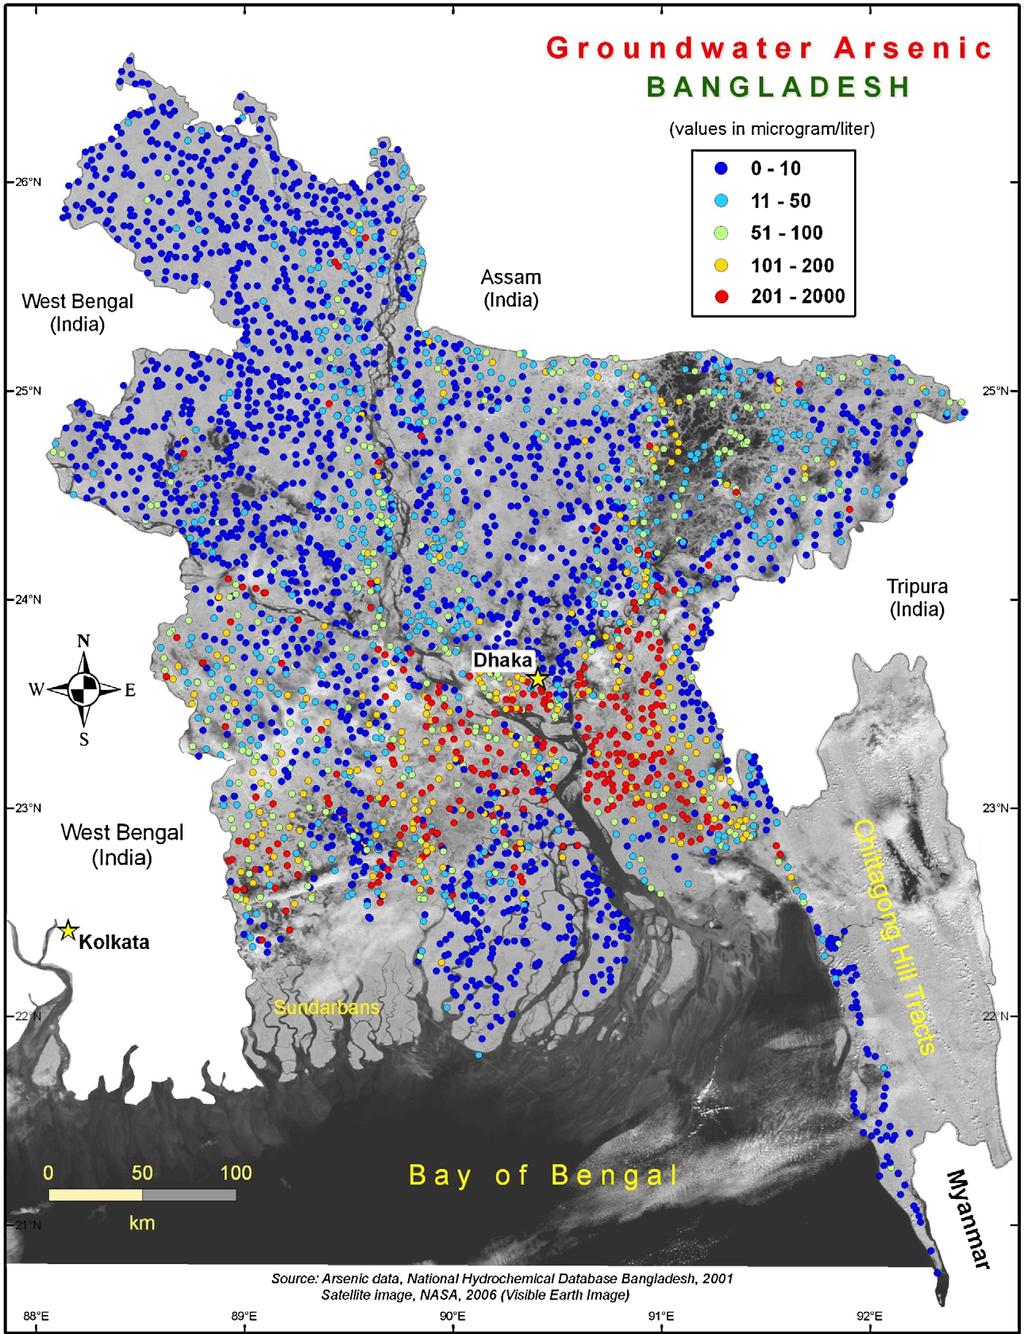 114 M. Shamsudduha et al. / Journal of Contaminant Hydrology 99 (2008) 112 136 Fig. 1. Map of groundwater arsenic concentration in Bangladesh.